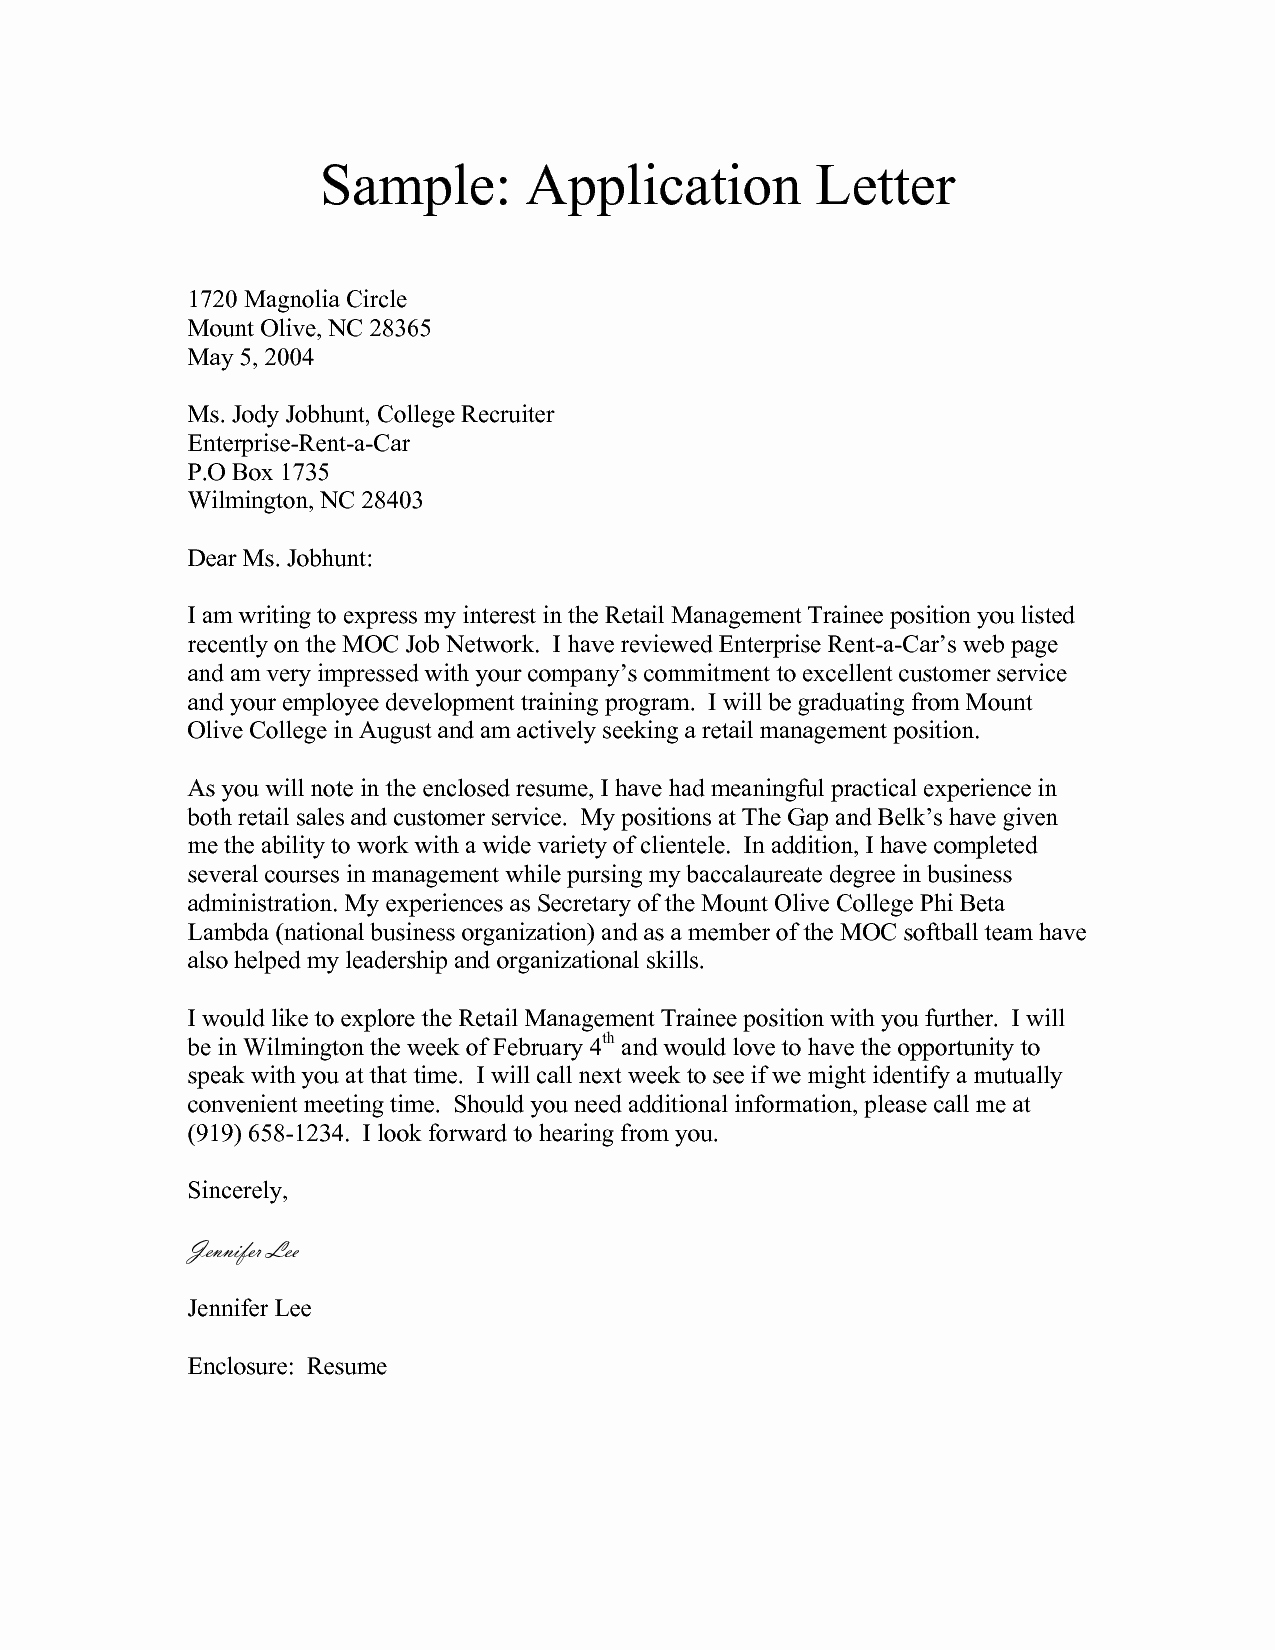 Application Letter for Job Fresh Download Free Application Letters